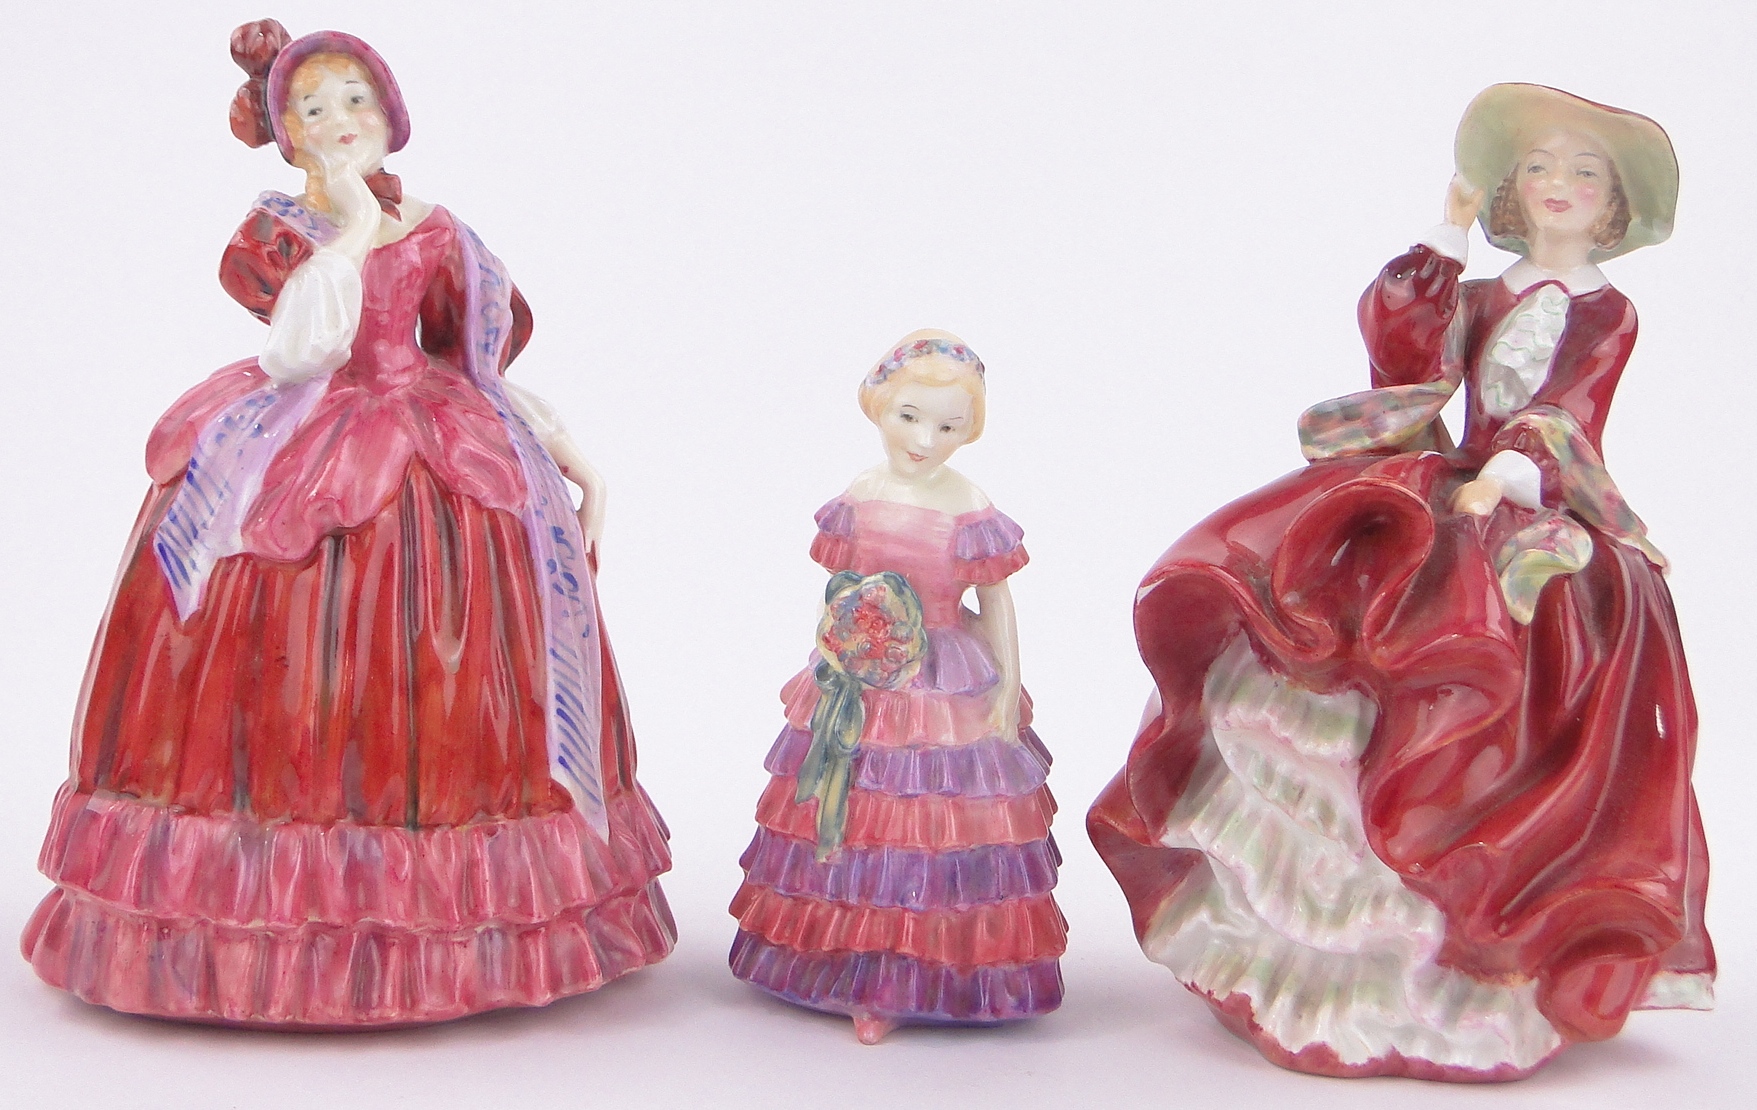 3 Doulton figures, "Top of the Hill," HN 1834, "Quality Street",